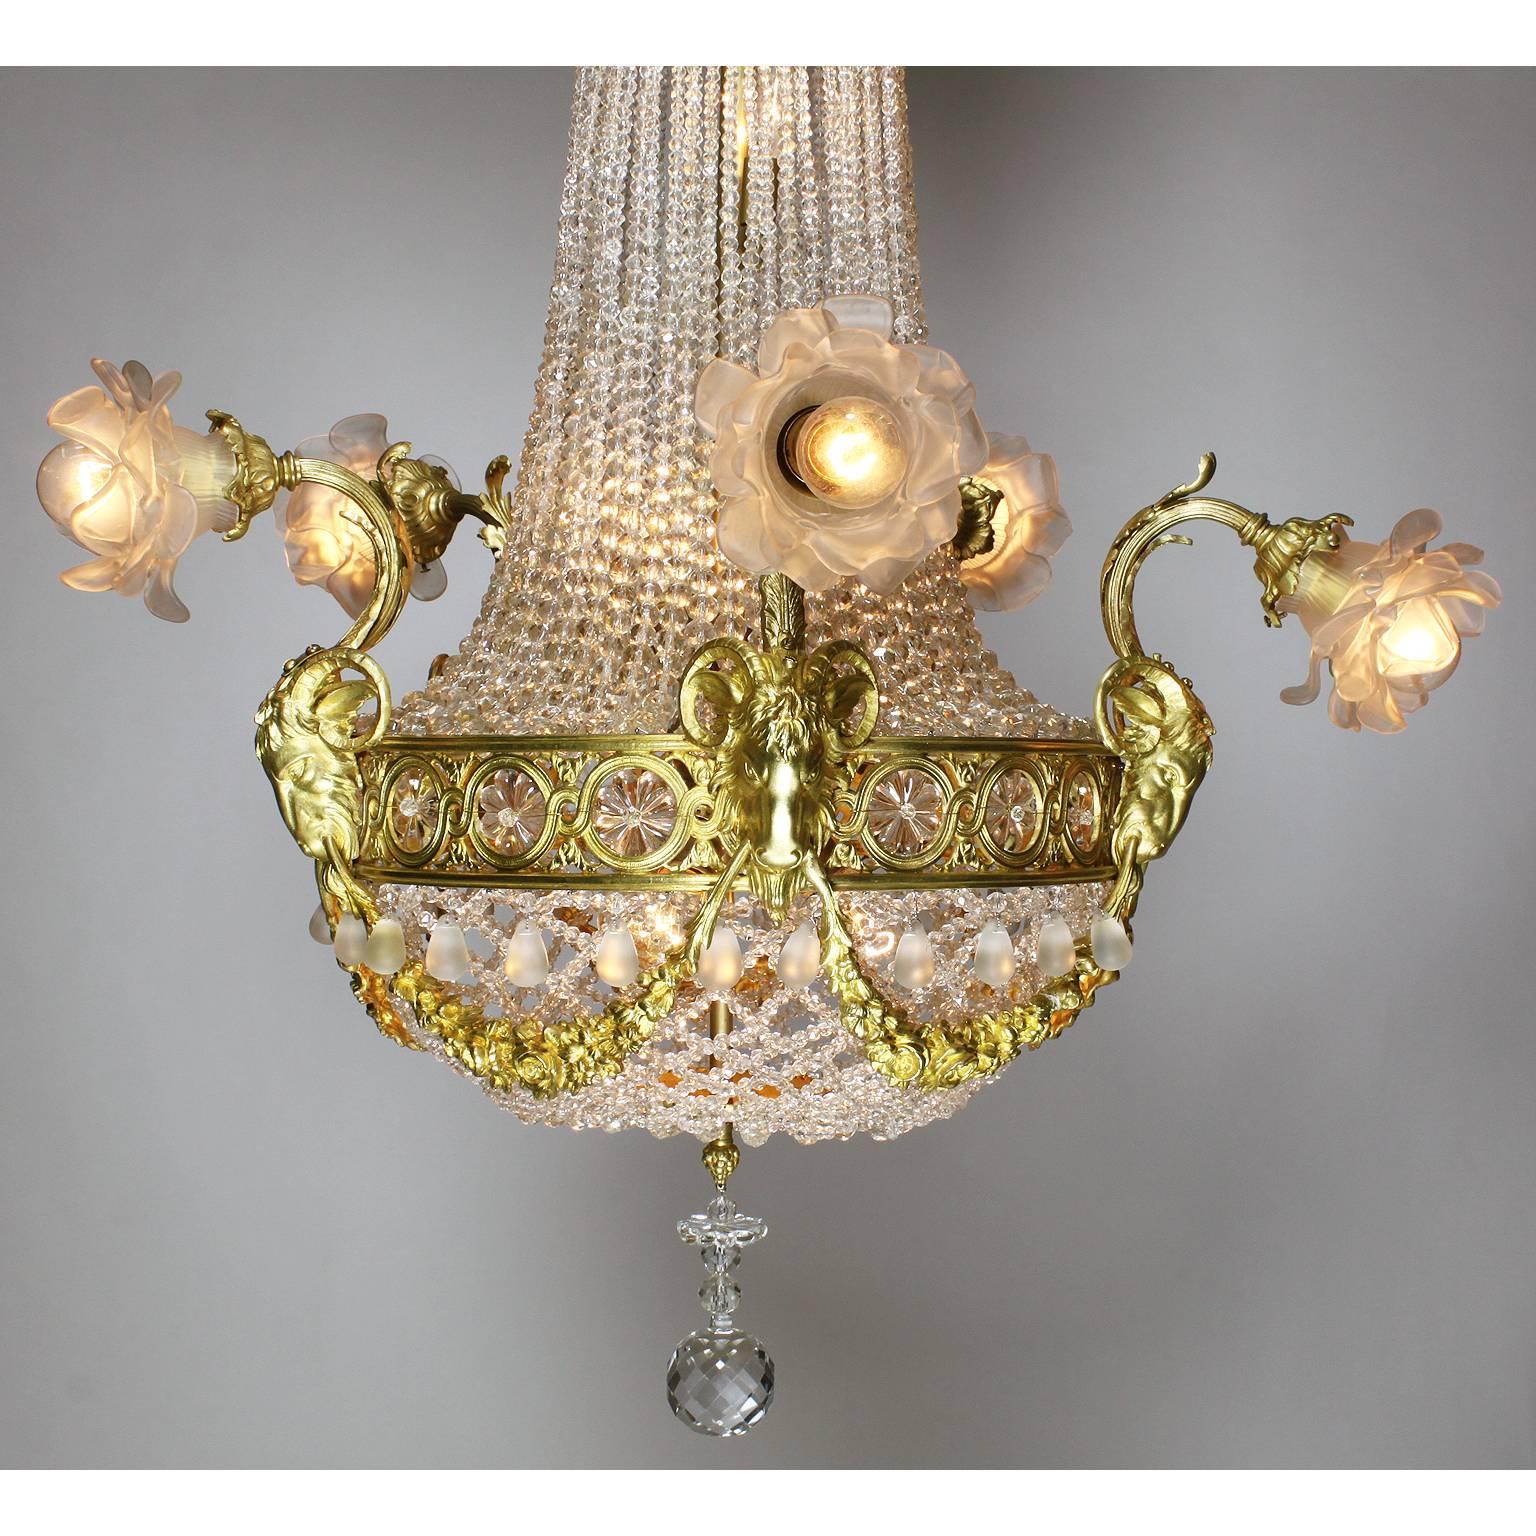 Carved French 19th-20th Century Louis XVI Style Gilt-Bronze and Beaded Glass Chandelier